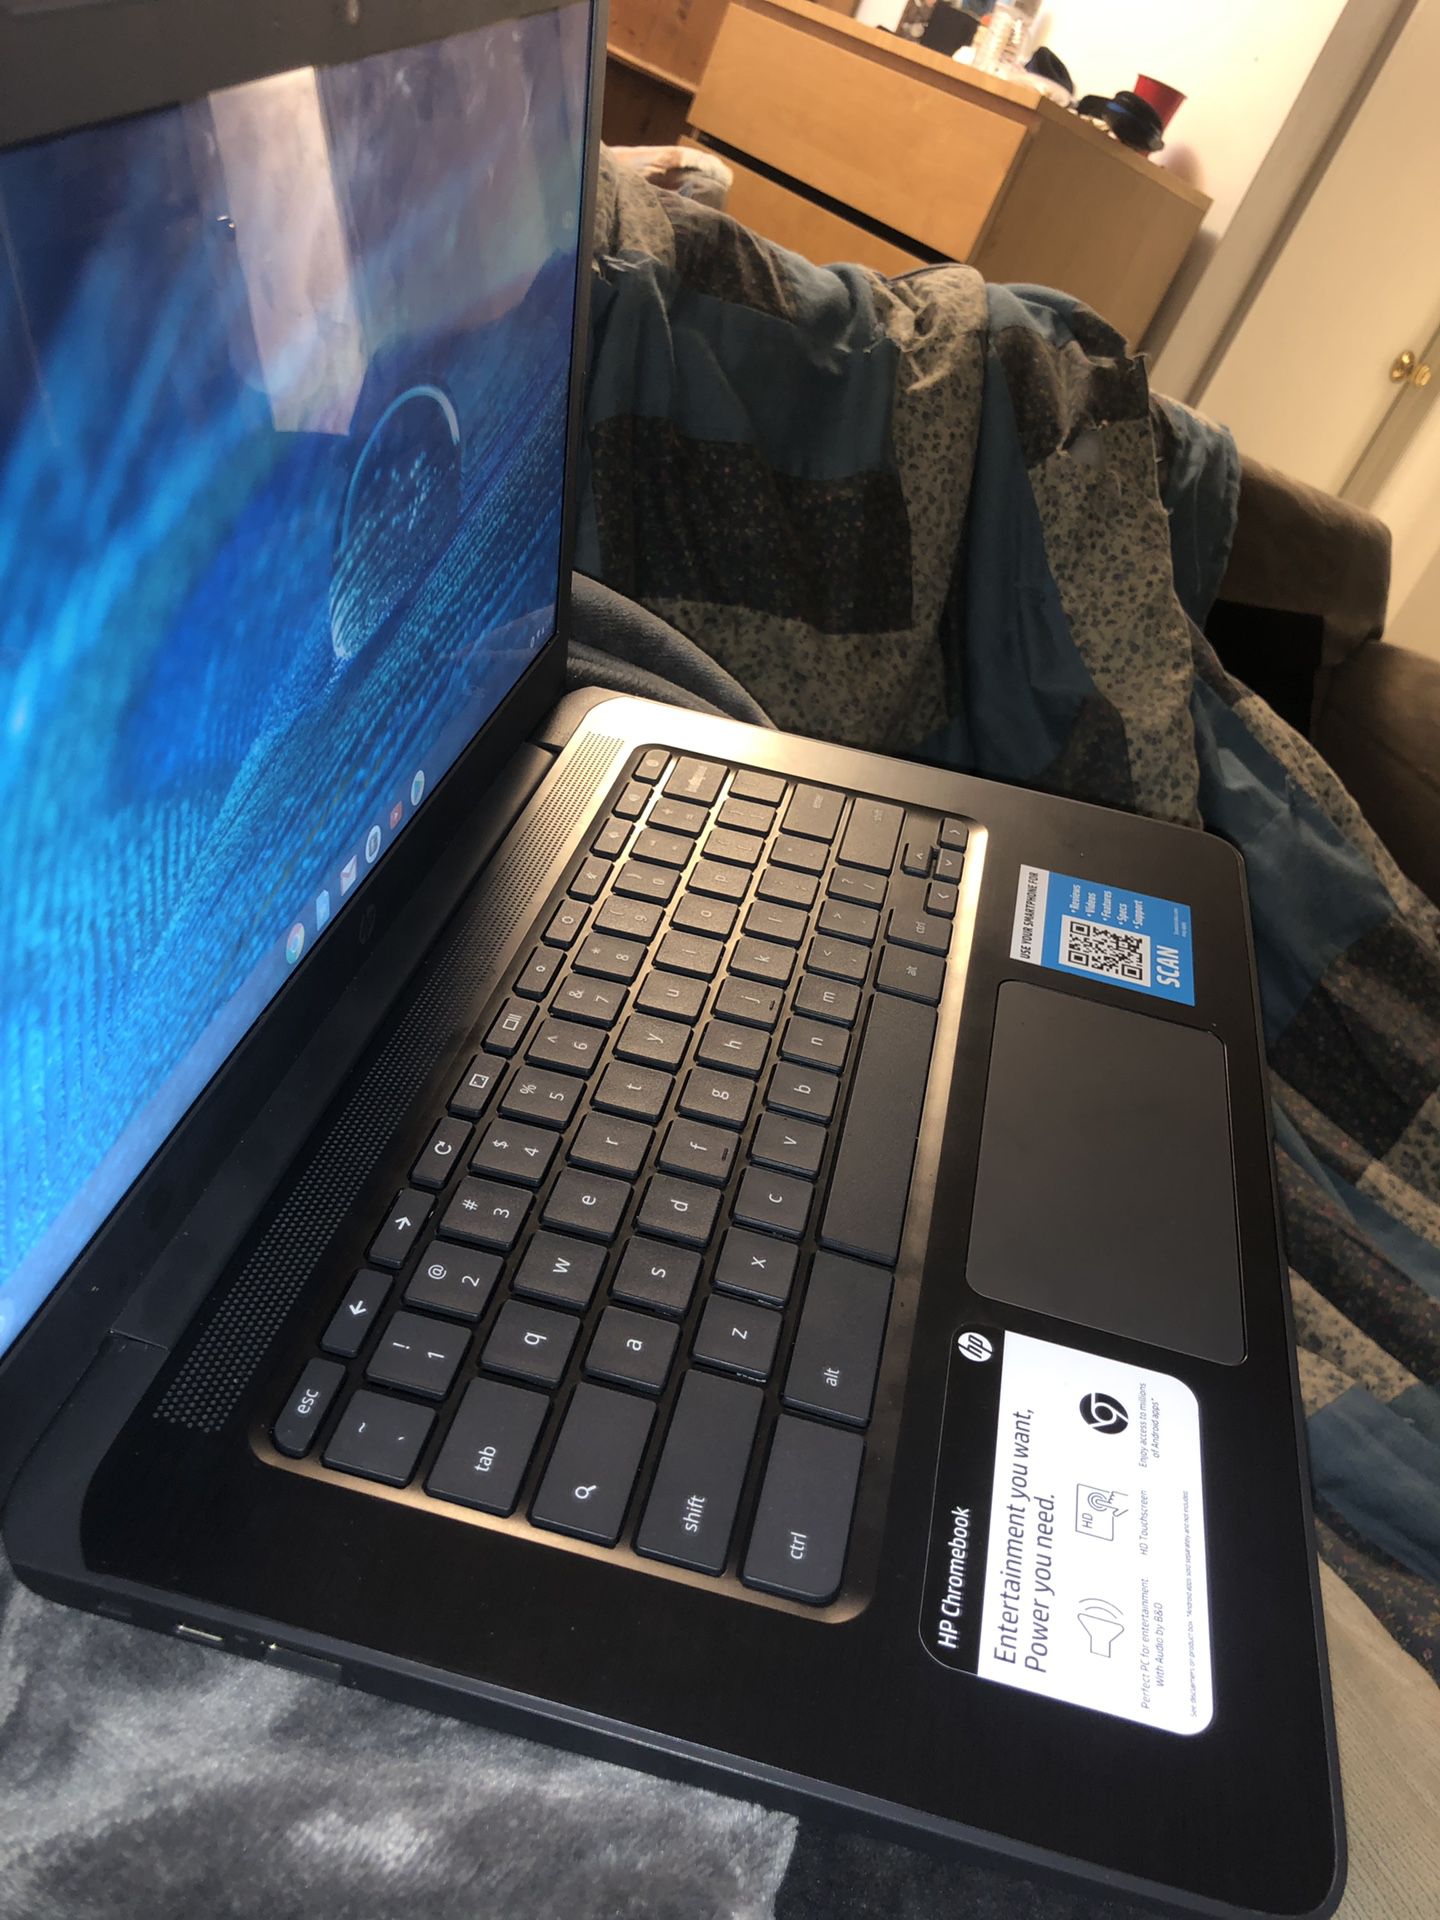 BRAND NEW NEVER USED LABTOP